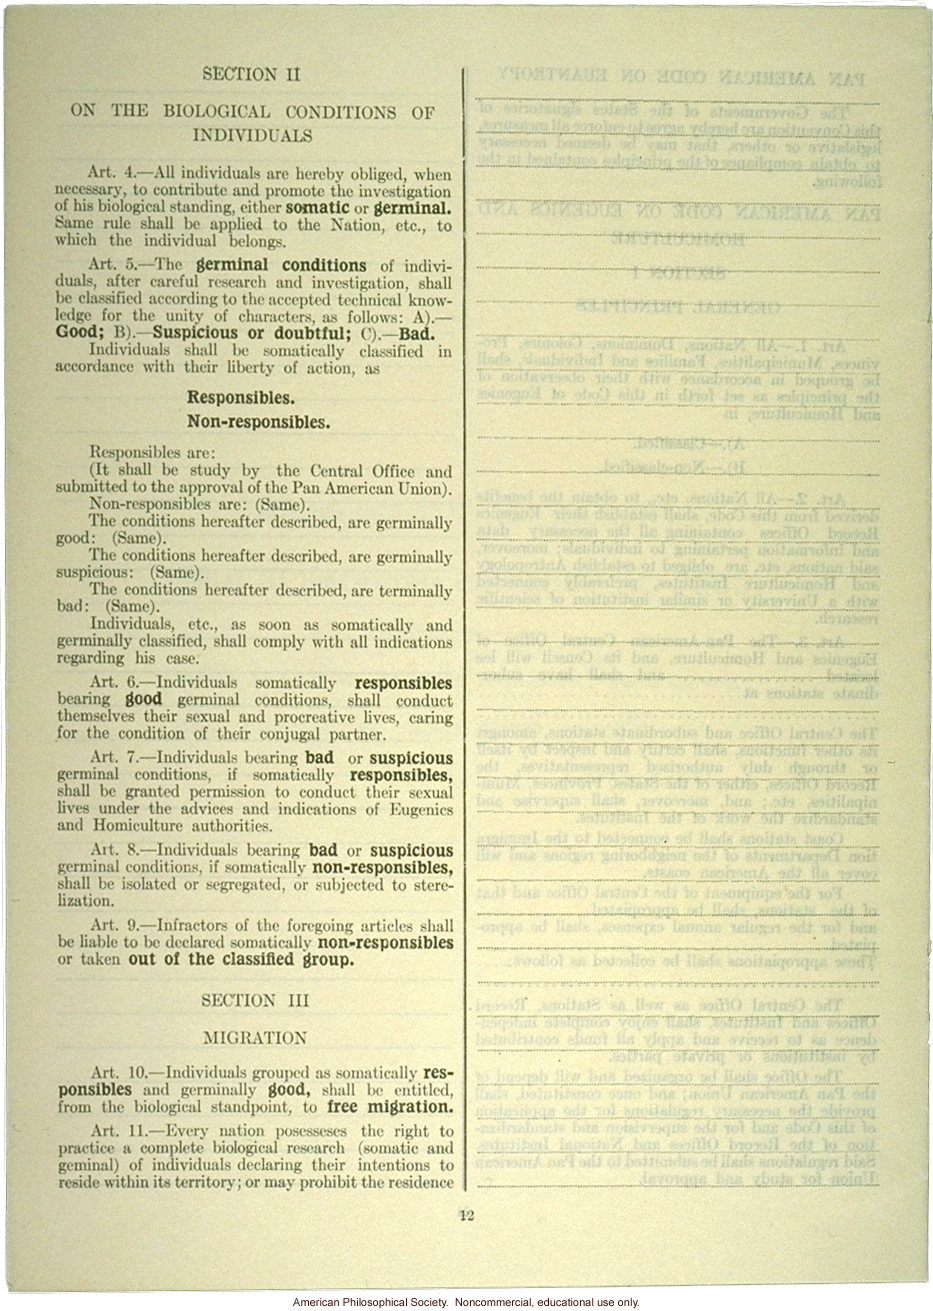 &quote;Project of panamerican code on eugenics and homiculture,&quote; proposed by the Cuban delegation